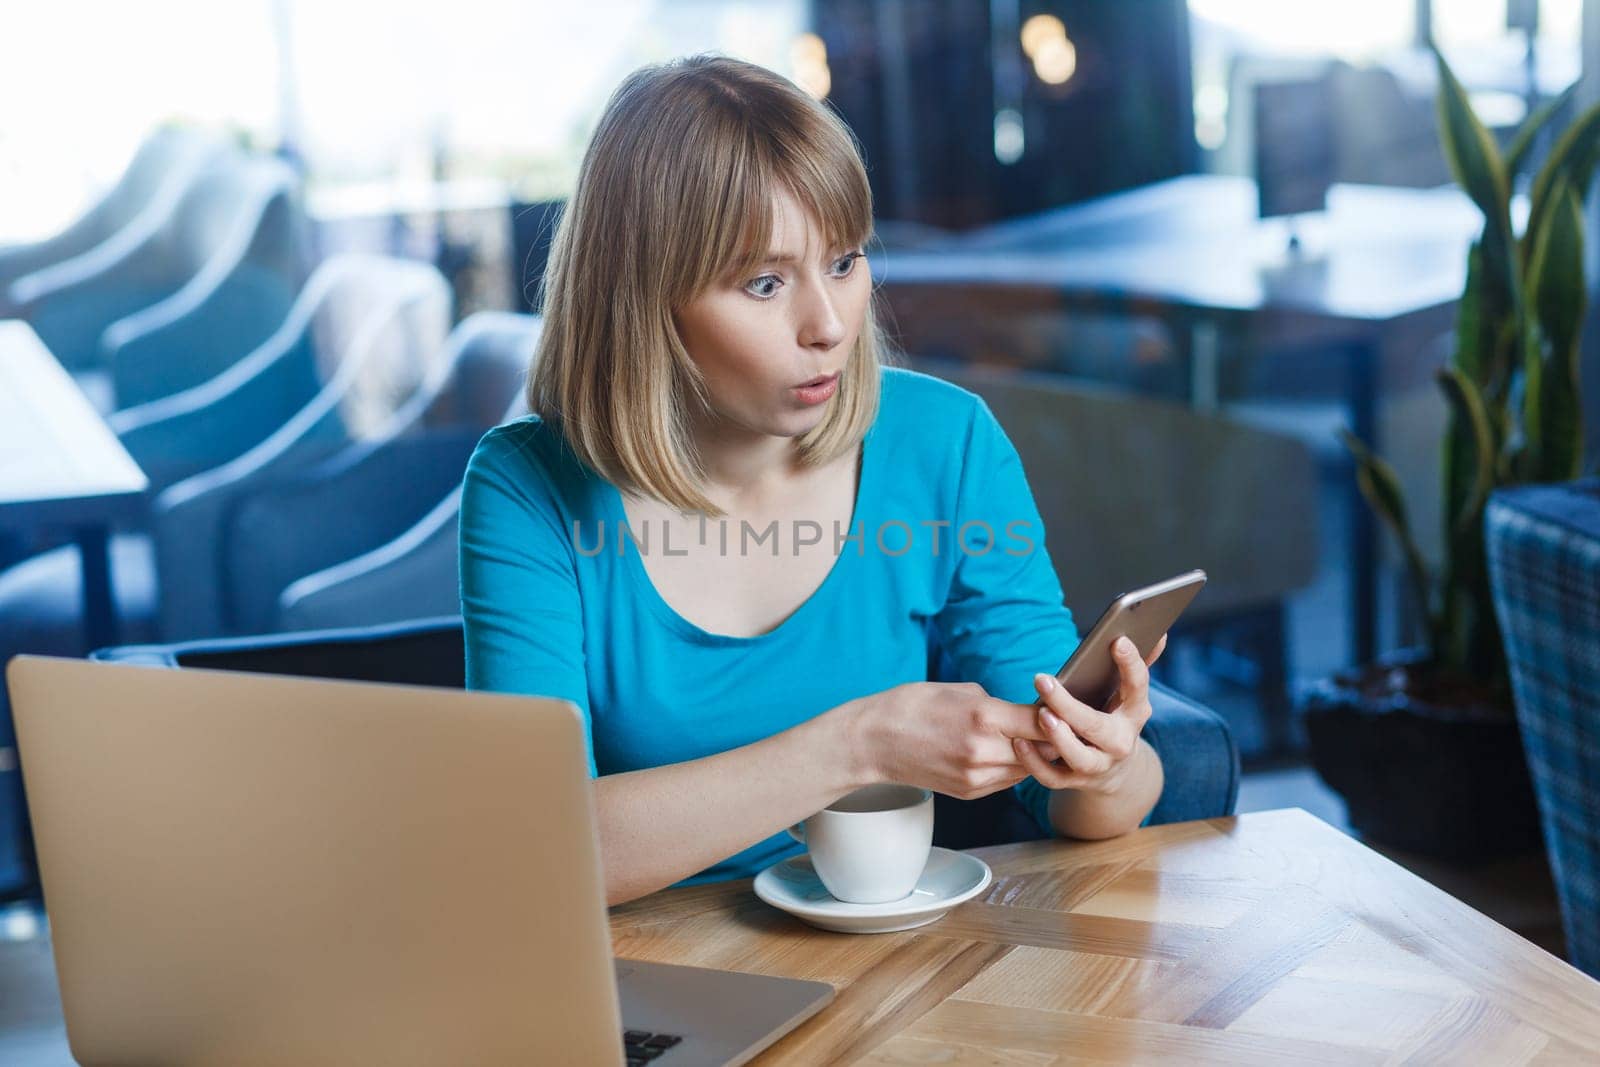 Portrait of shocked amazed young woman with blonde hair in blue shirt working on laptop, having break, using cell phone, checking social networks, reading breaking news. Indoor shot in cafe.